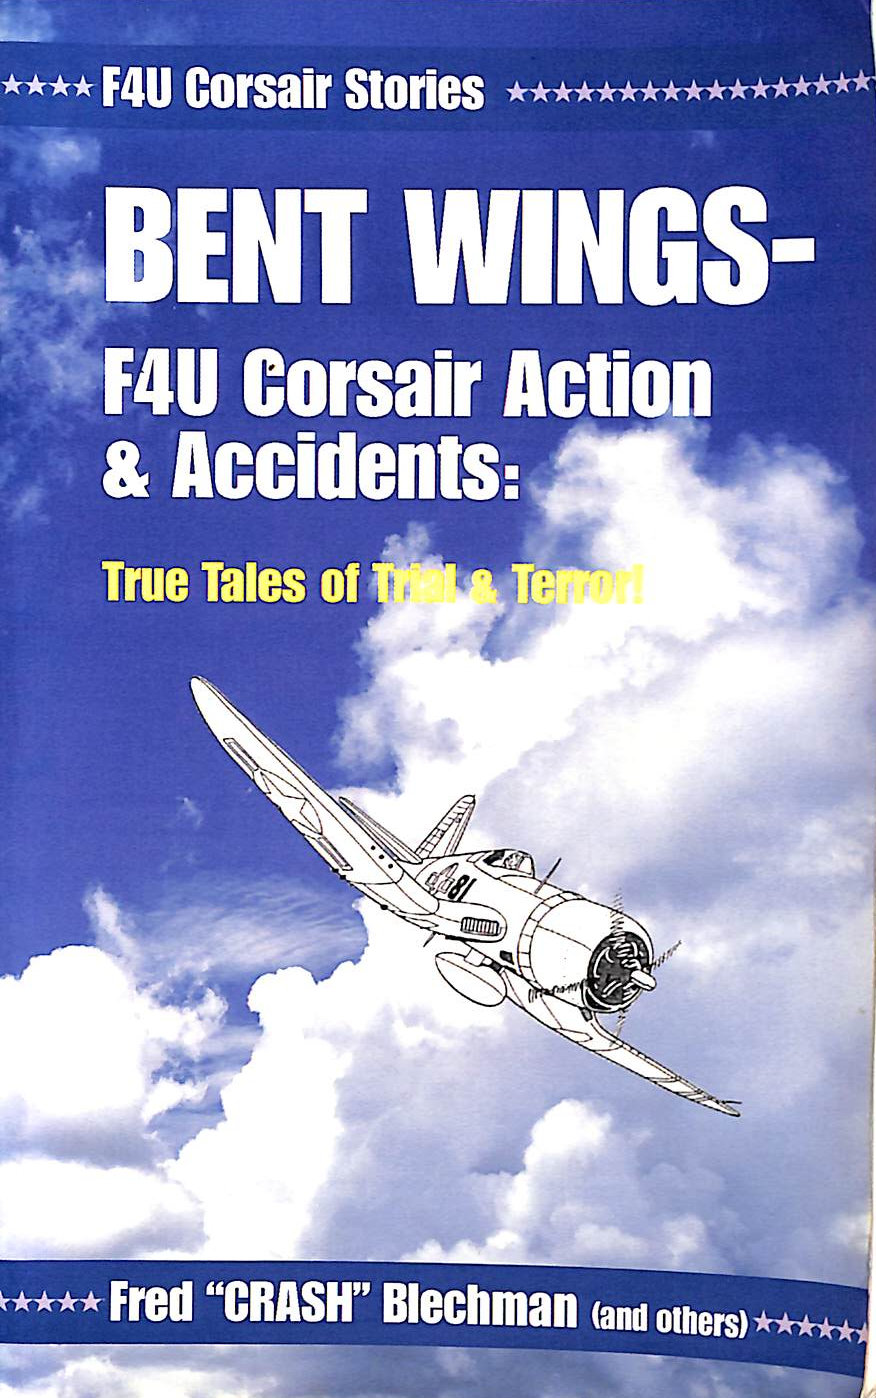 VARIOUS - Bent Wings - F4U Corsair Action and Accidents: True Tales of Trial and Terror!